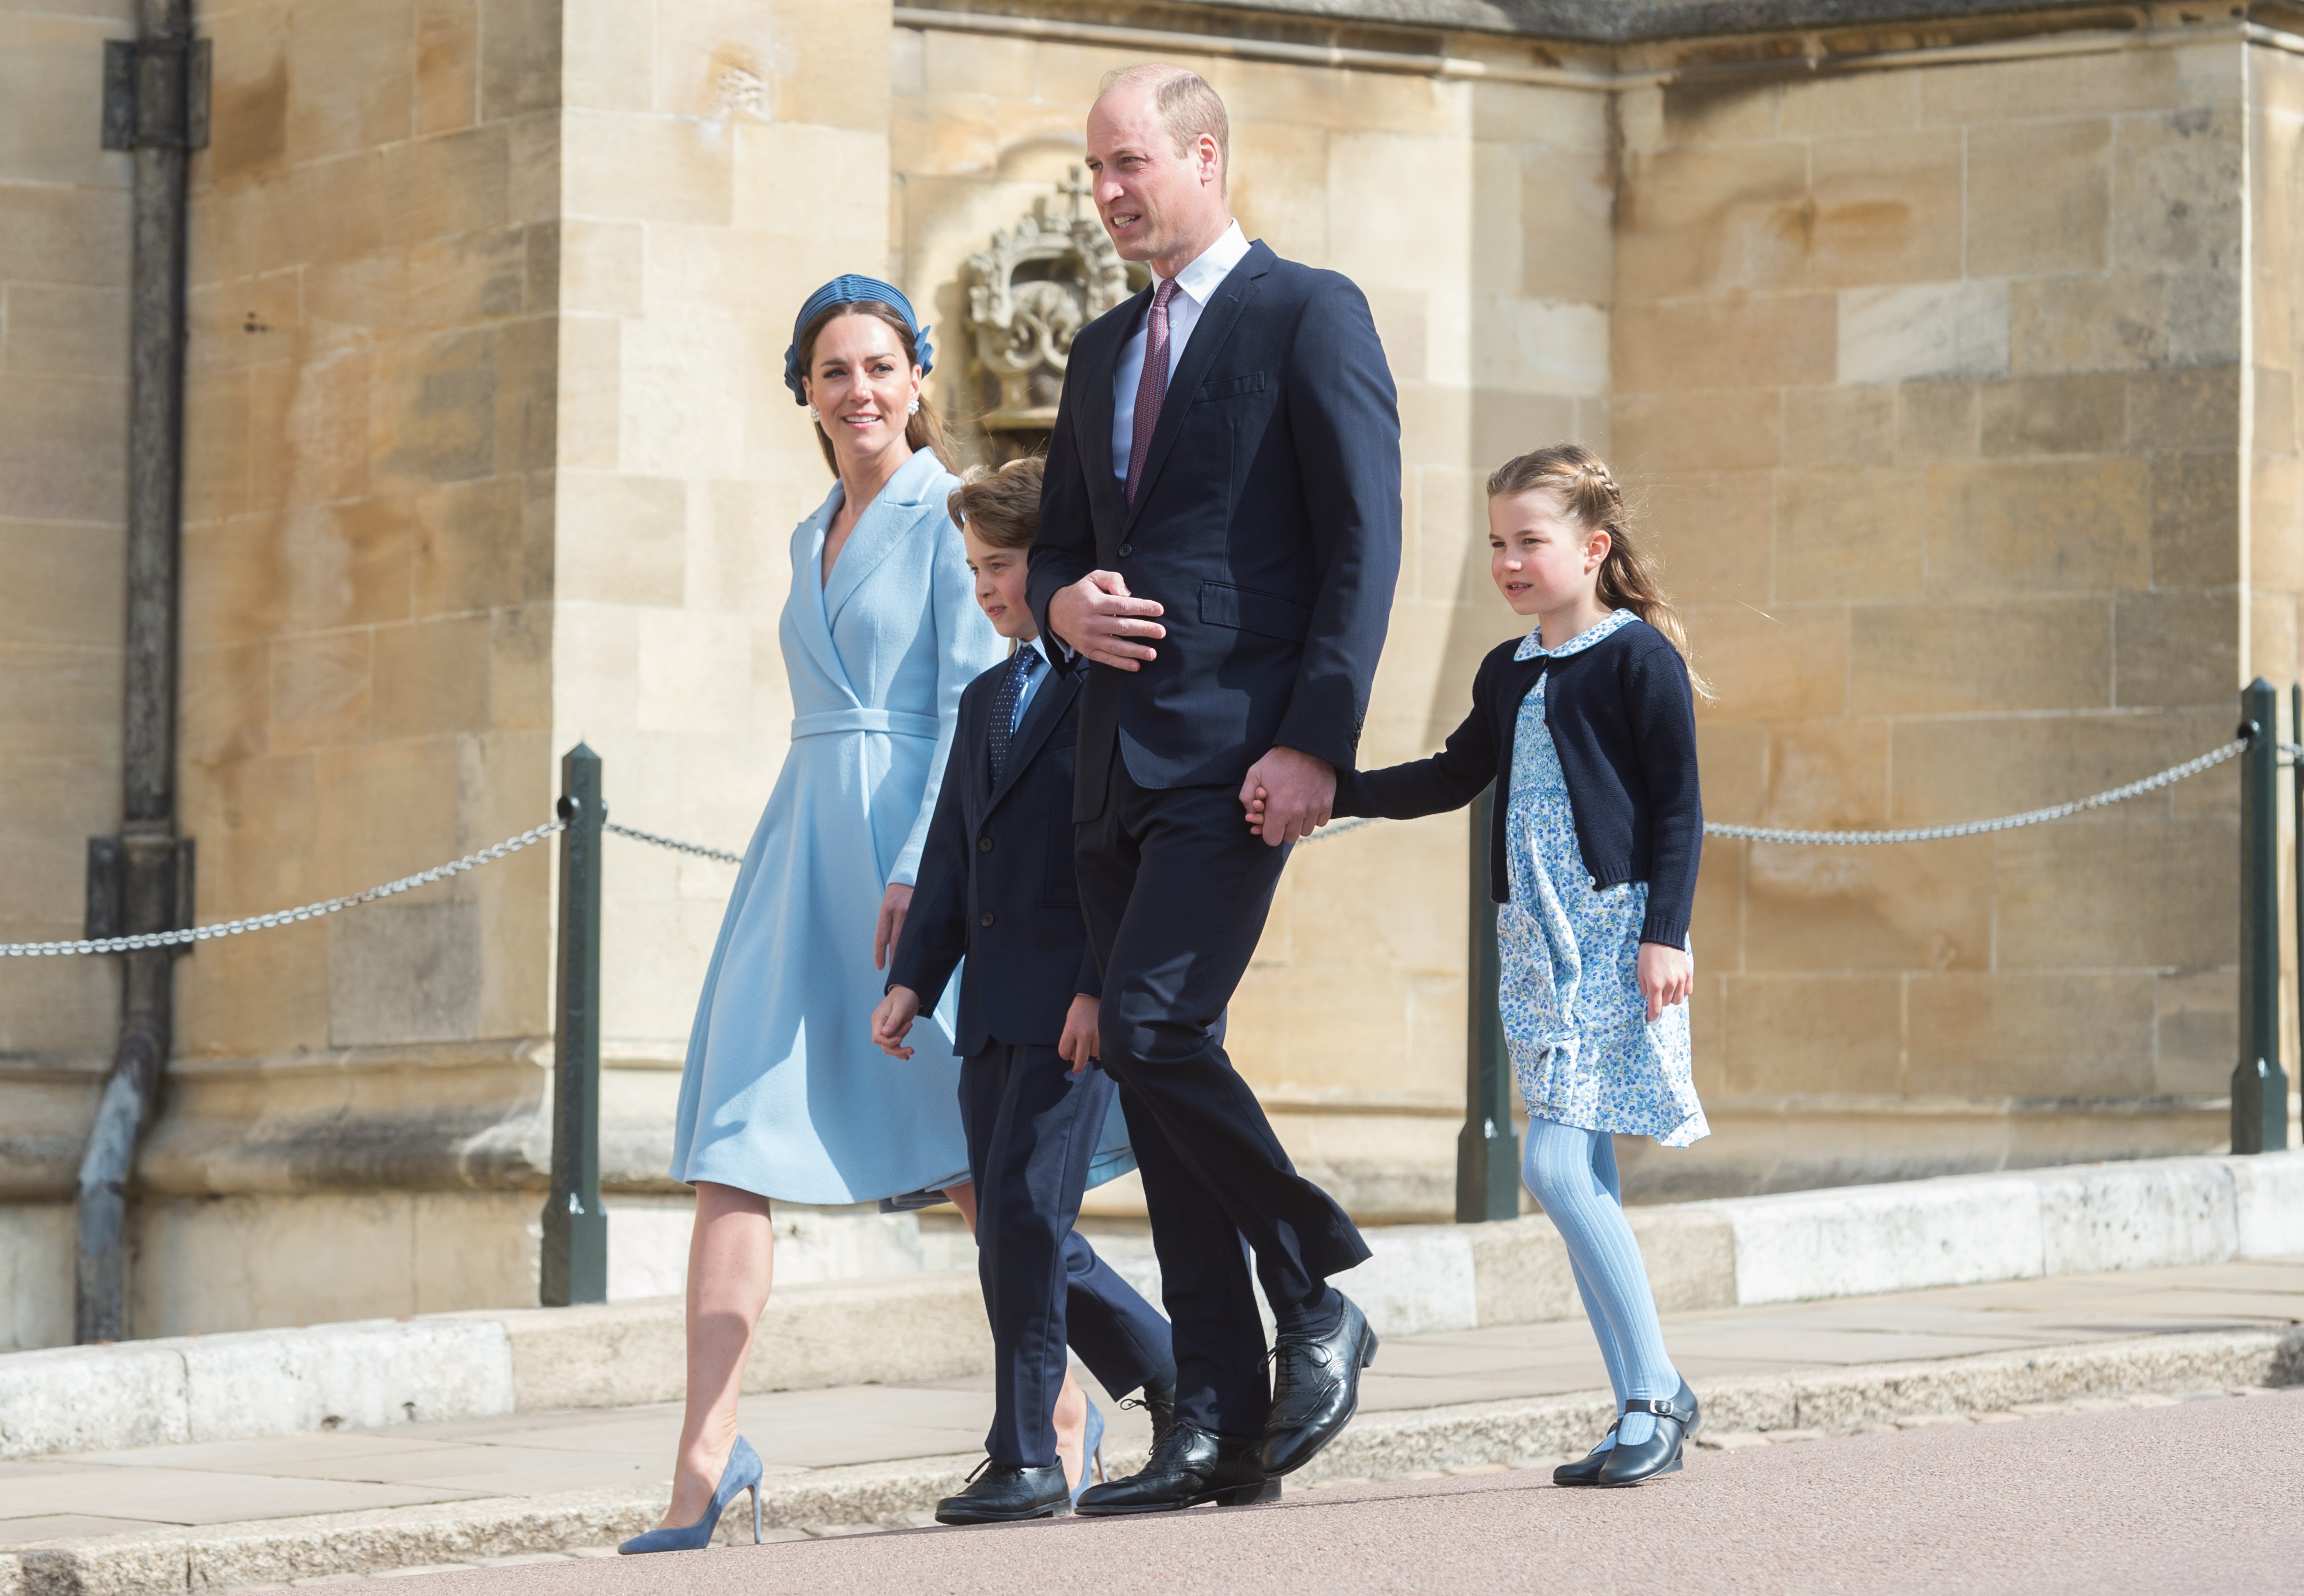 Prince William, Duke of Cambridge, Catherine, Duchess of Cambridge, Prince George and Princess Charlotte attend the traditional Easter Sunday Church service at St Georges Chapel in the grounds of Windsor Castle on April 17, 2022 in Windsor, England. | Source: Getty Images